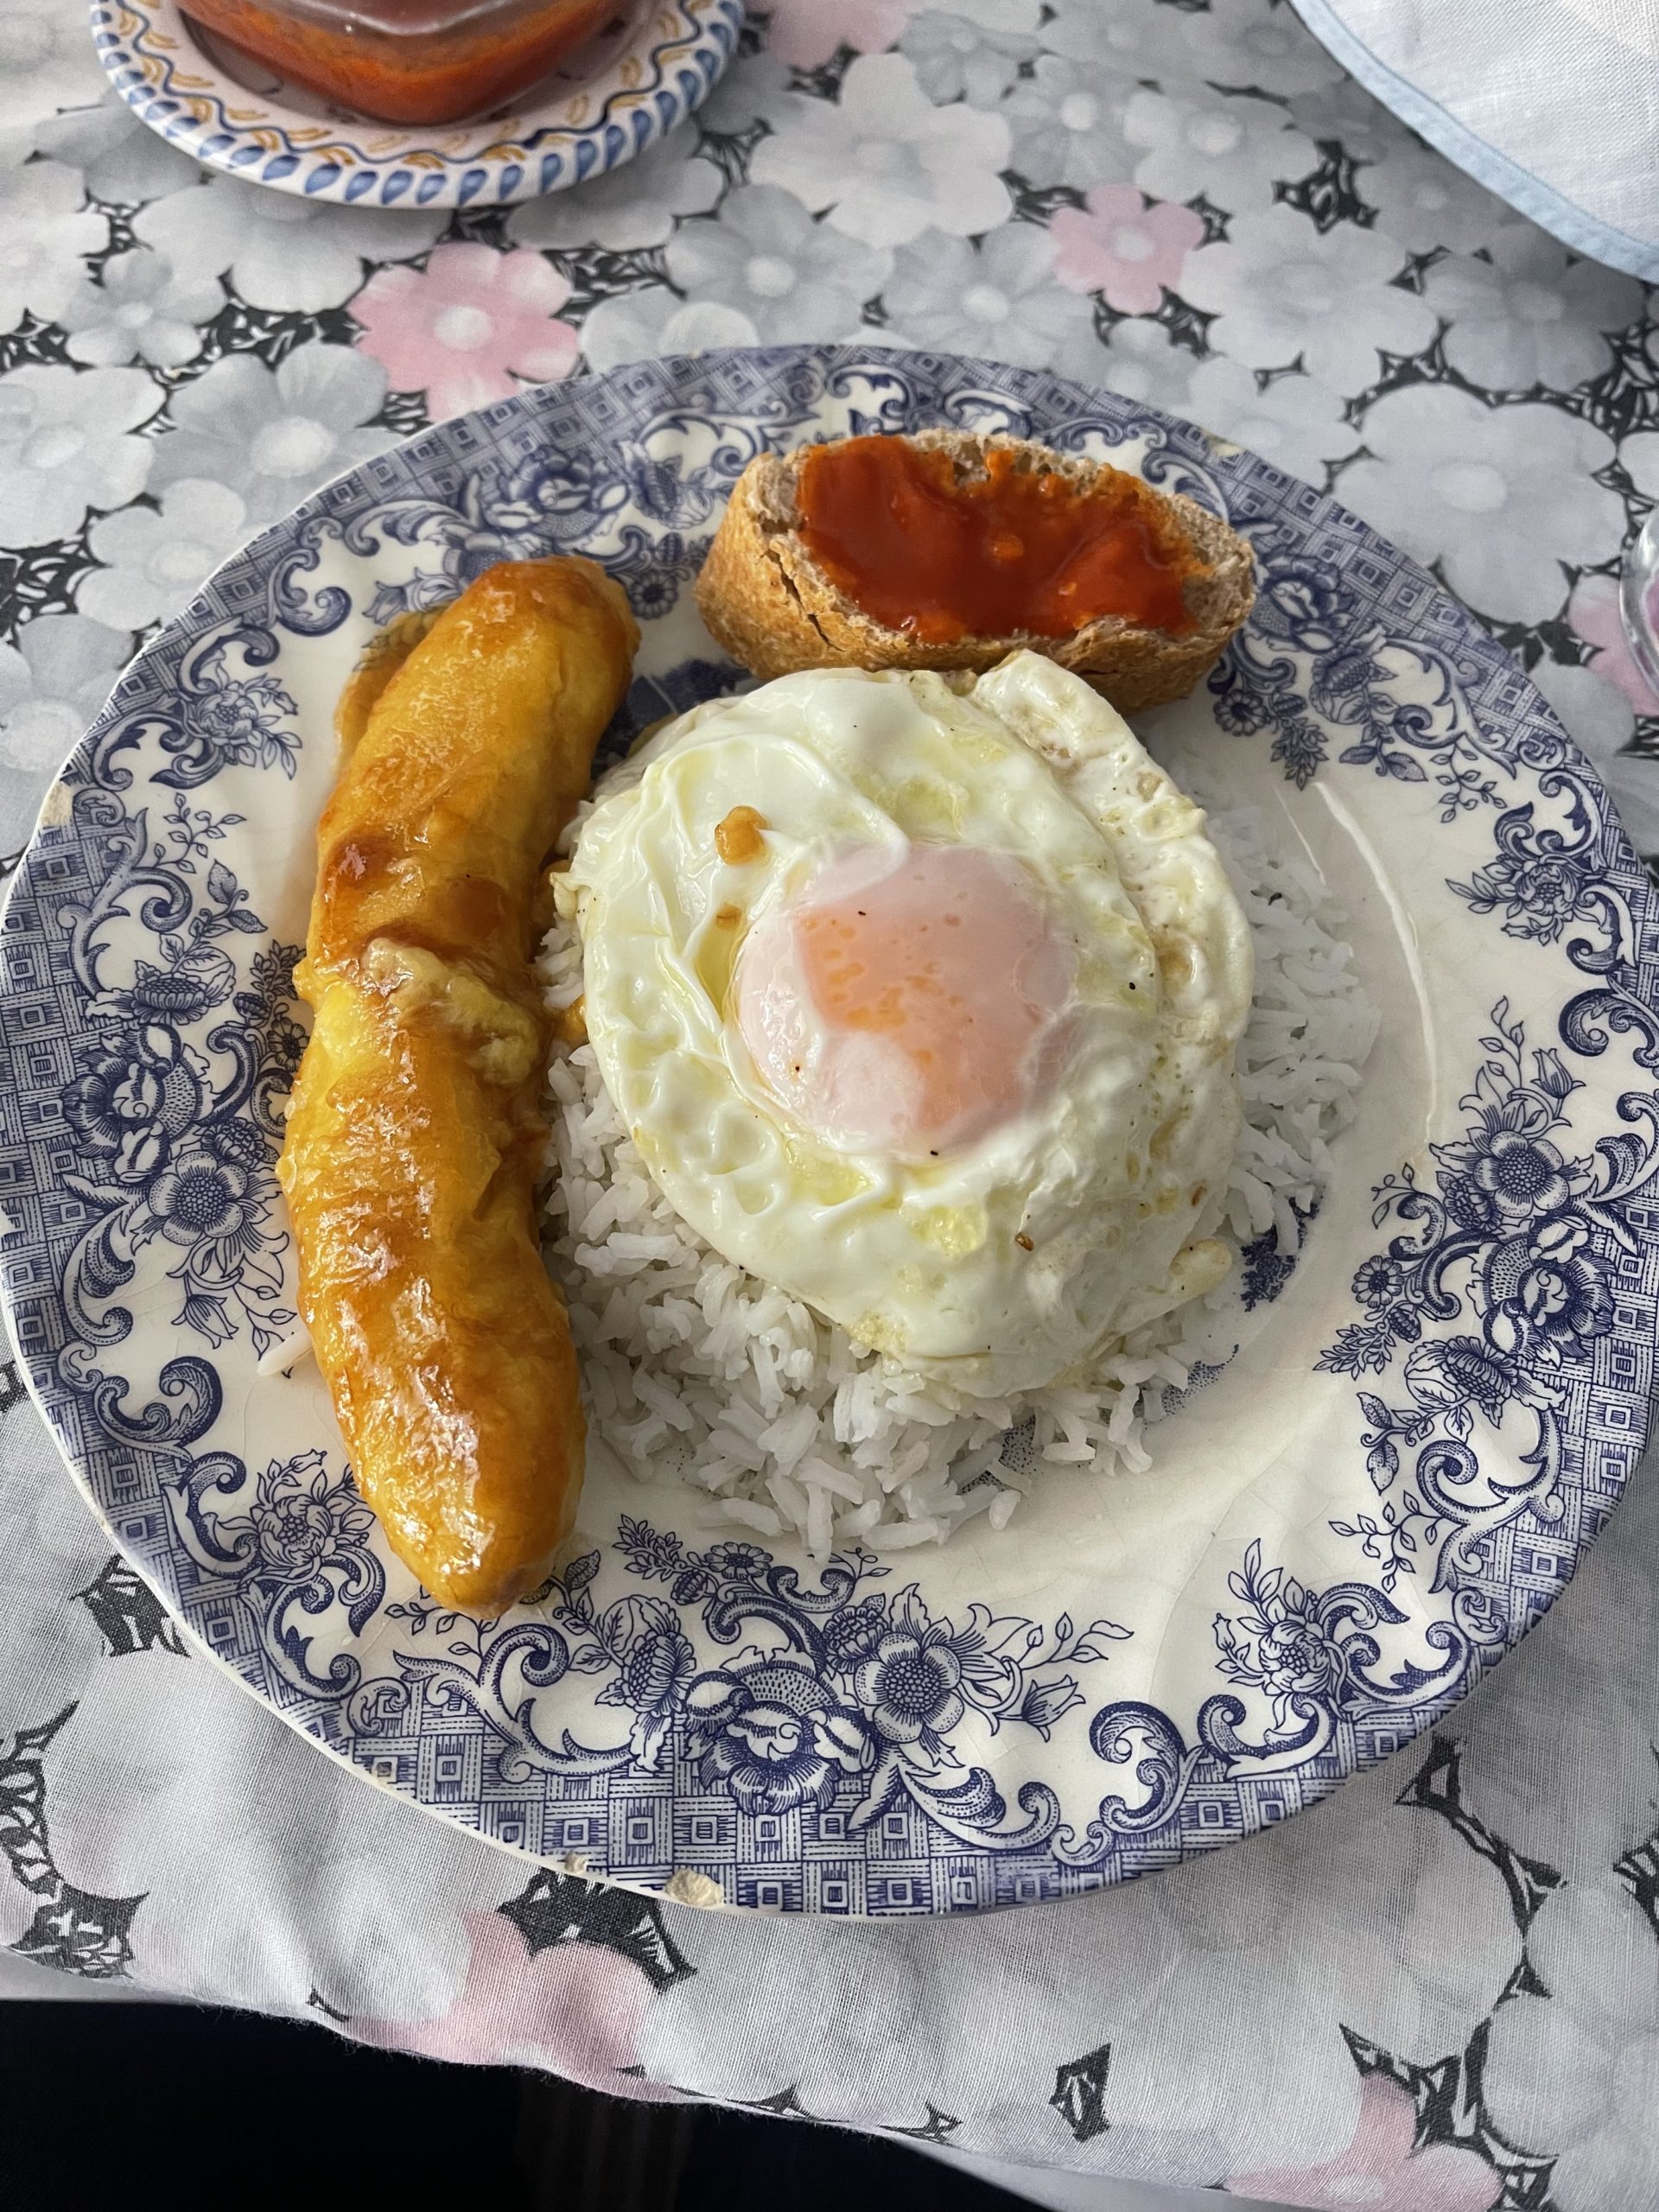 A picture of a plate with rice, a fried egg, and a plantain.